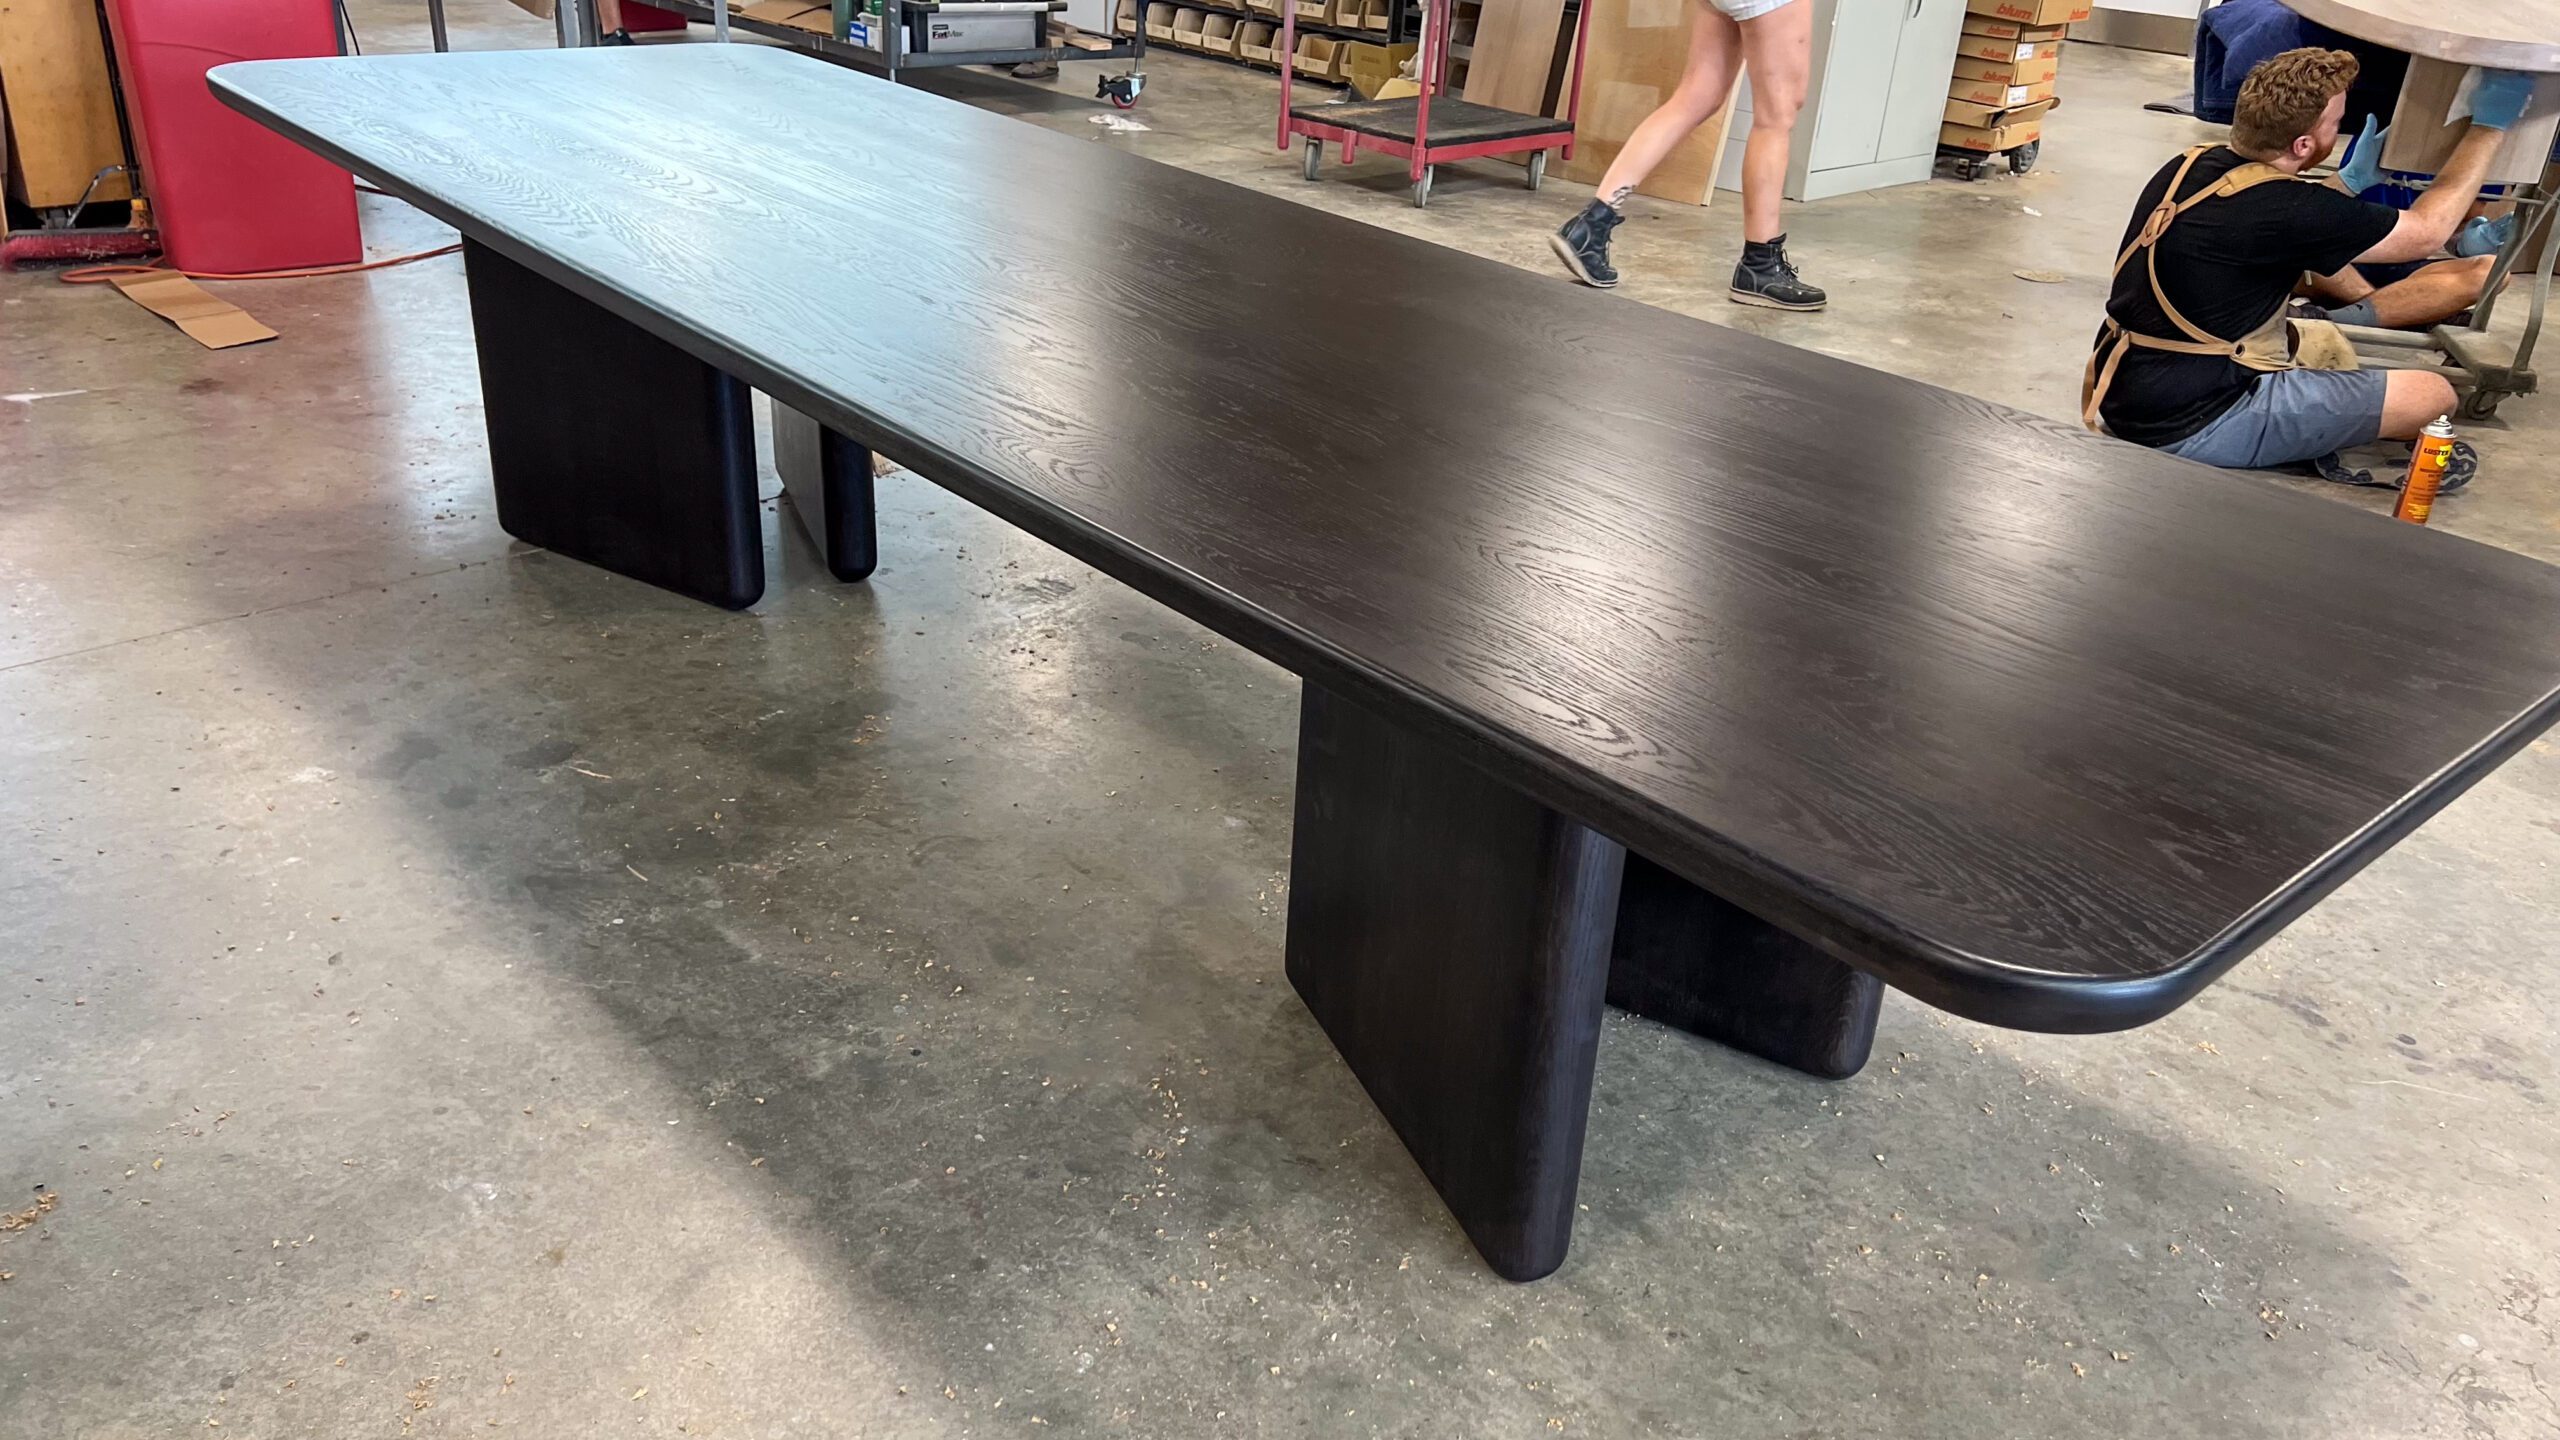 Top of Ebonized Oak Table from Solid Wood